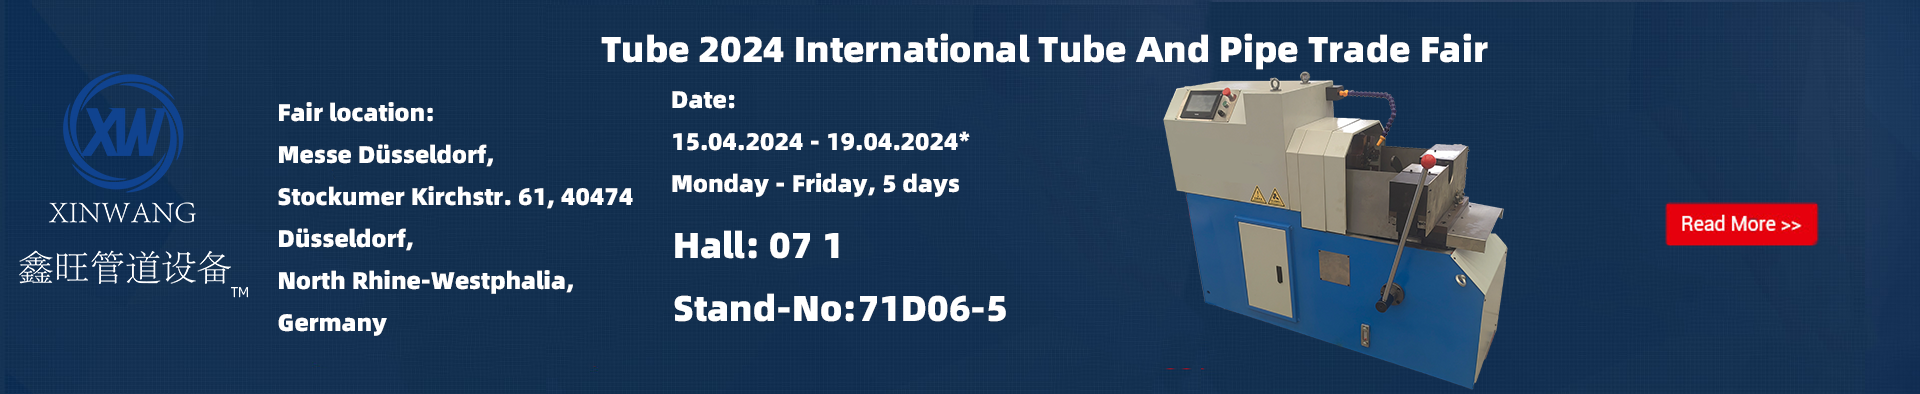 Xinwang Machinery To Participate In Tube 2024 International Tube And Pipe Trade Fair